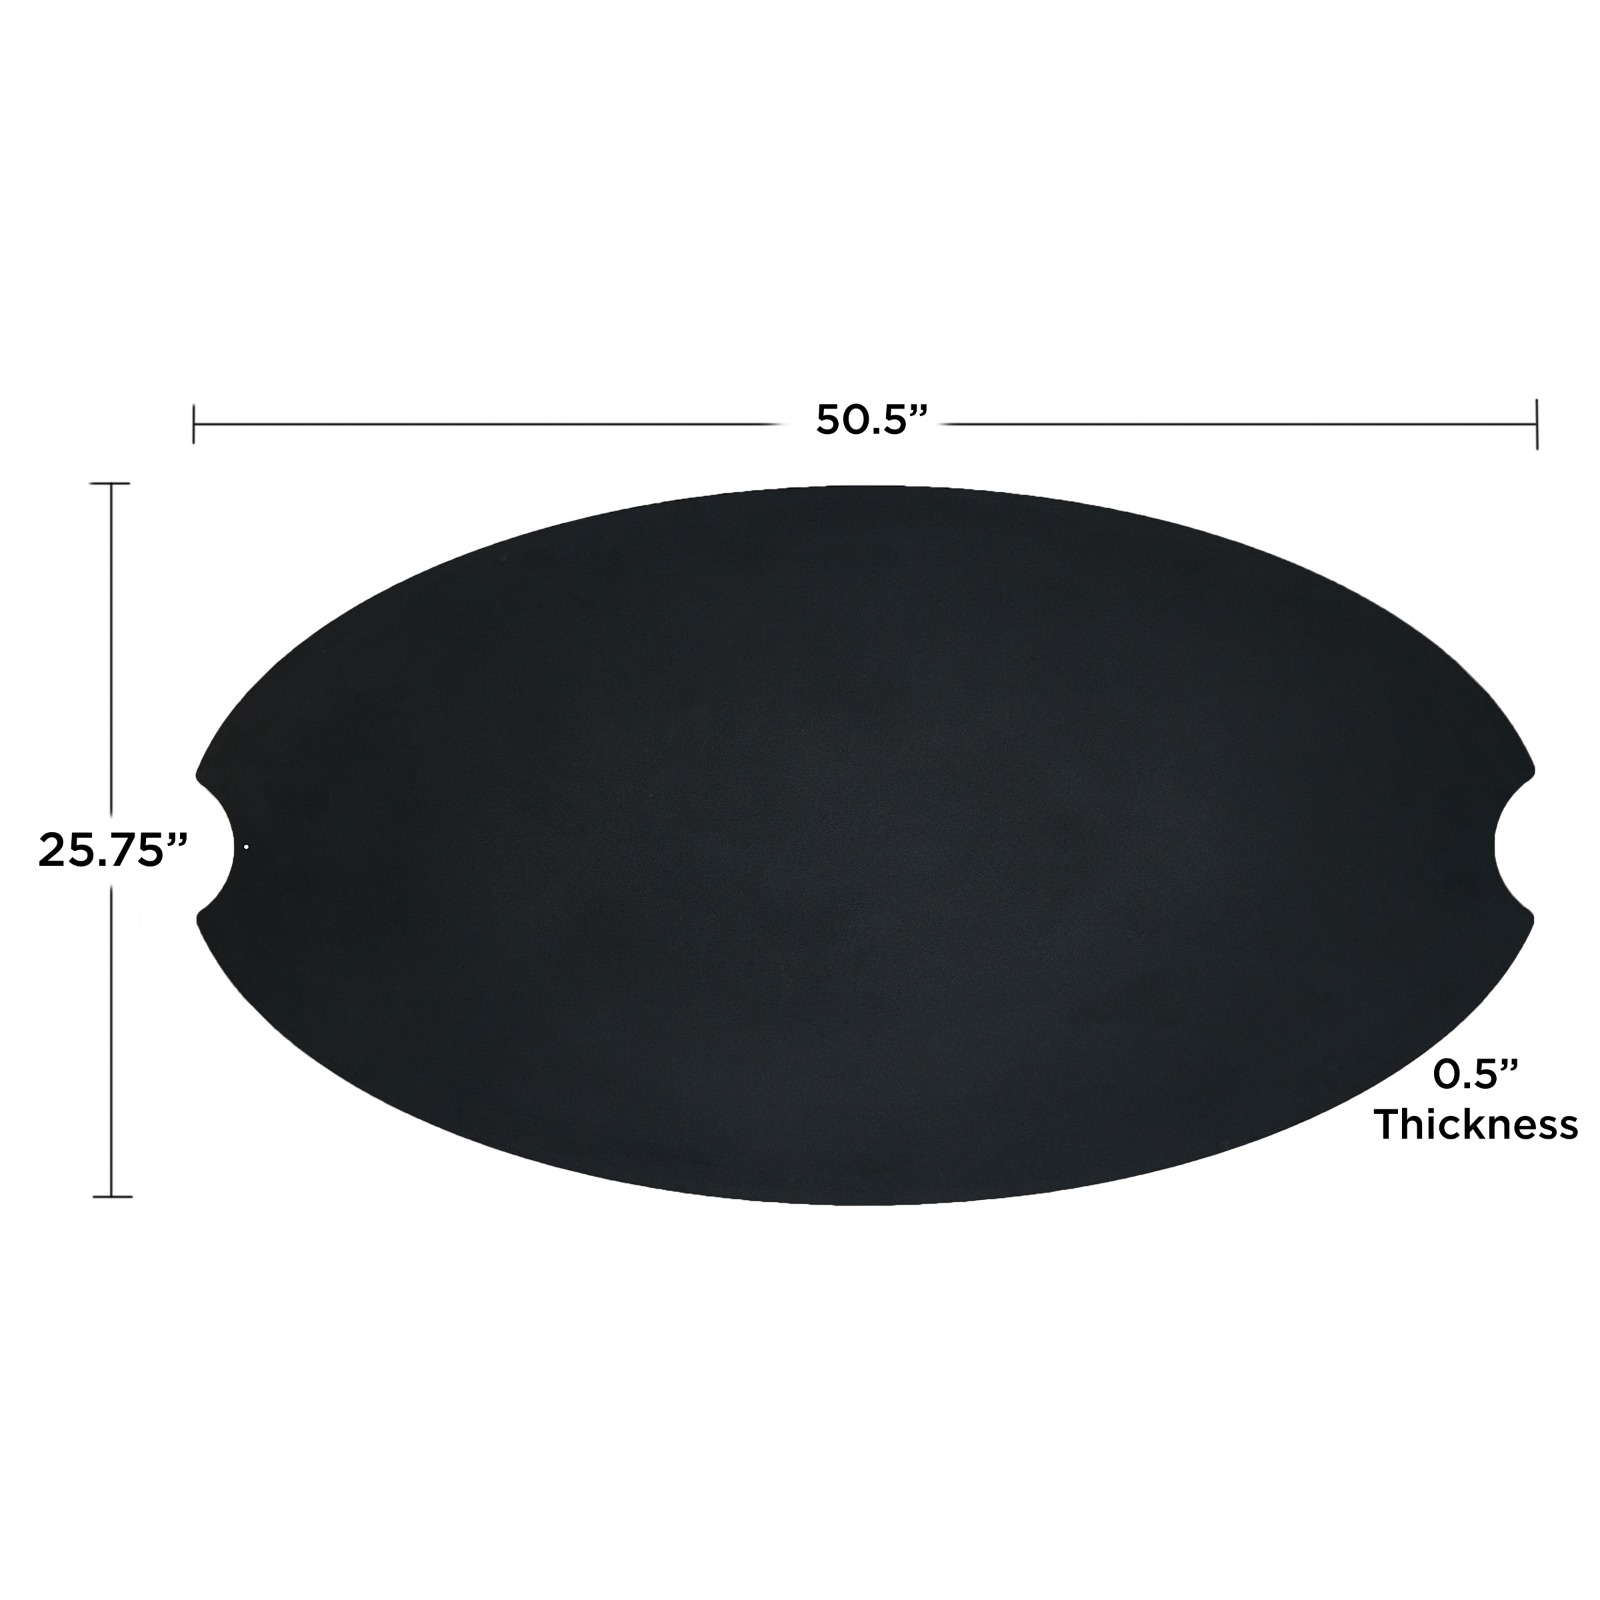 Riverside Large Oval Steel Lid Protective Cover for Propane or Natural Gas Fire Table Fire Bowl Fire Pit Outdoor Fireplace